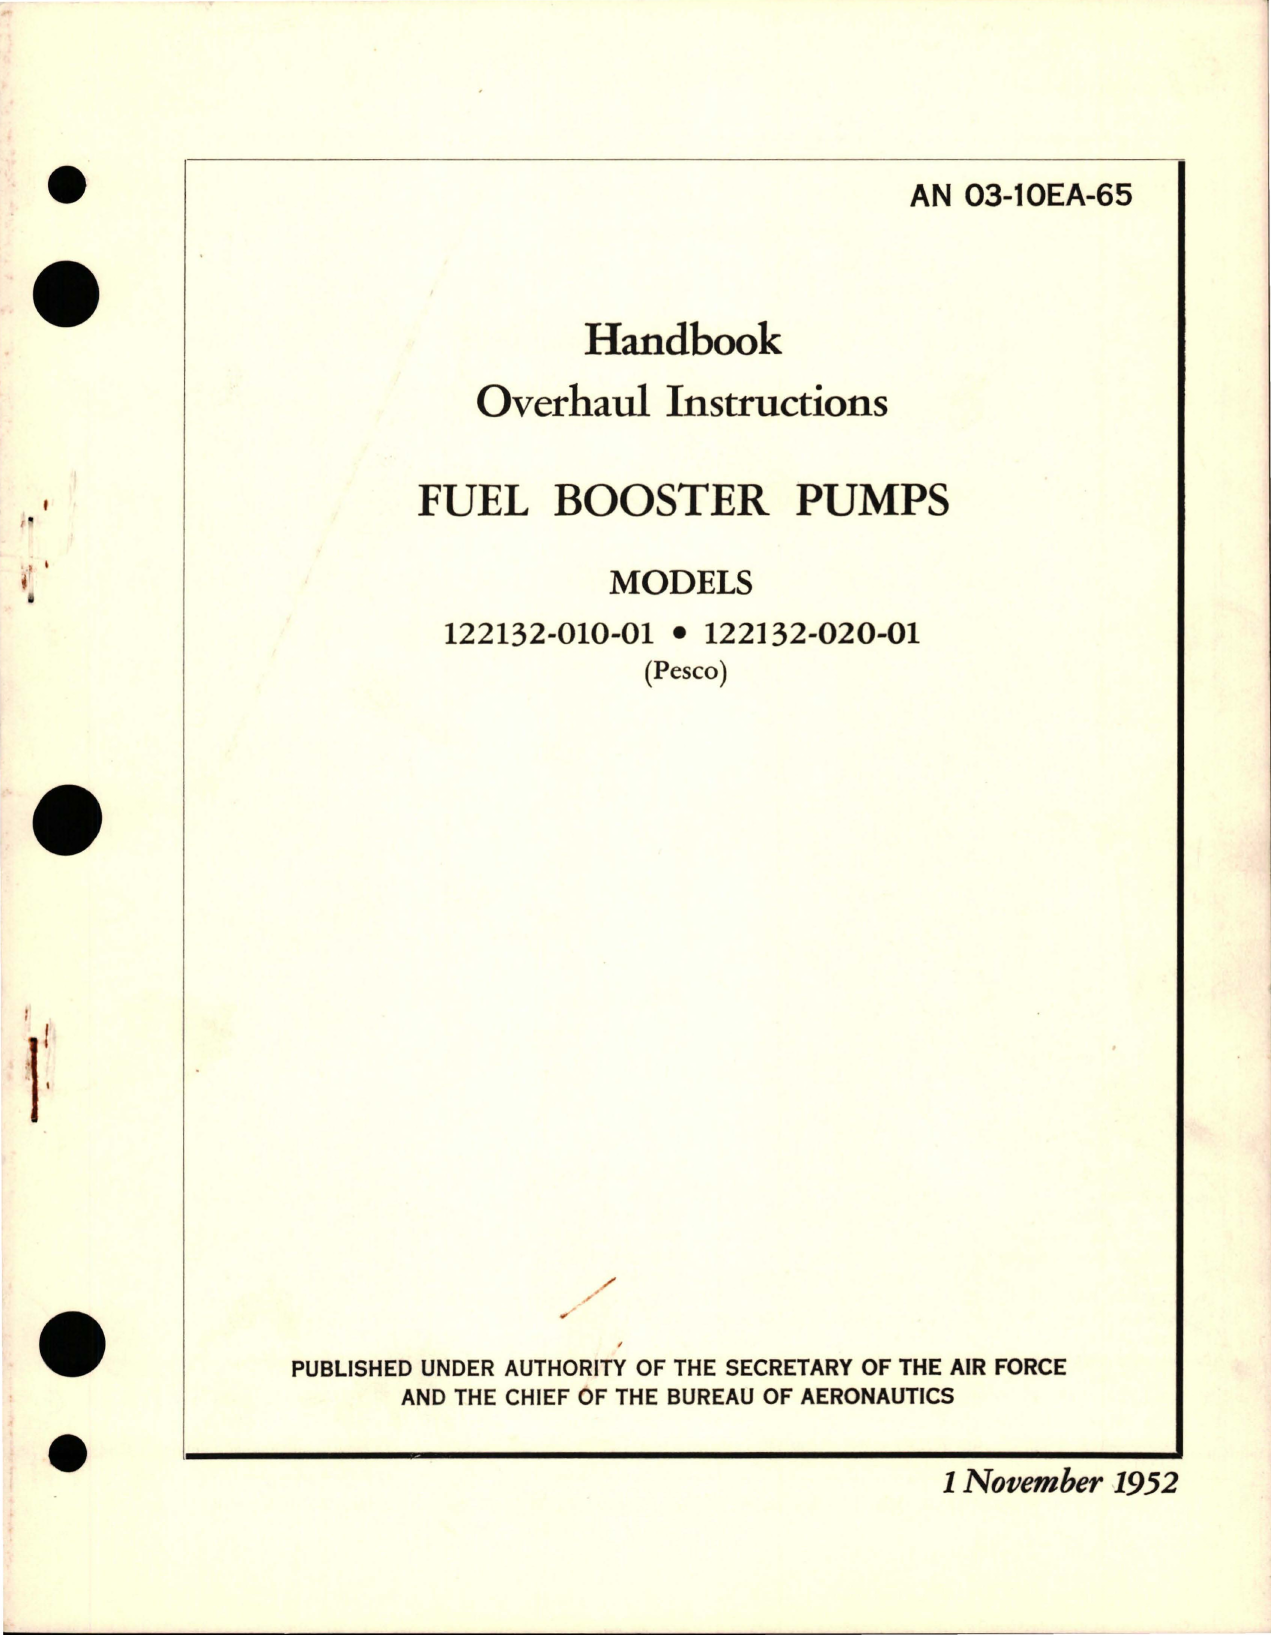 Sample page 1 from AirCorps Library document: Overhaul Instructions for Fuel Booster Pumps - Models 122132-010-01 and 122132-020-01